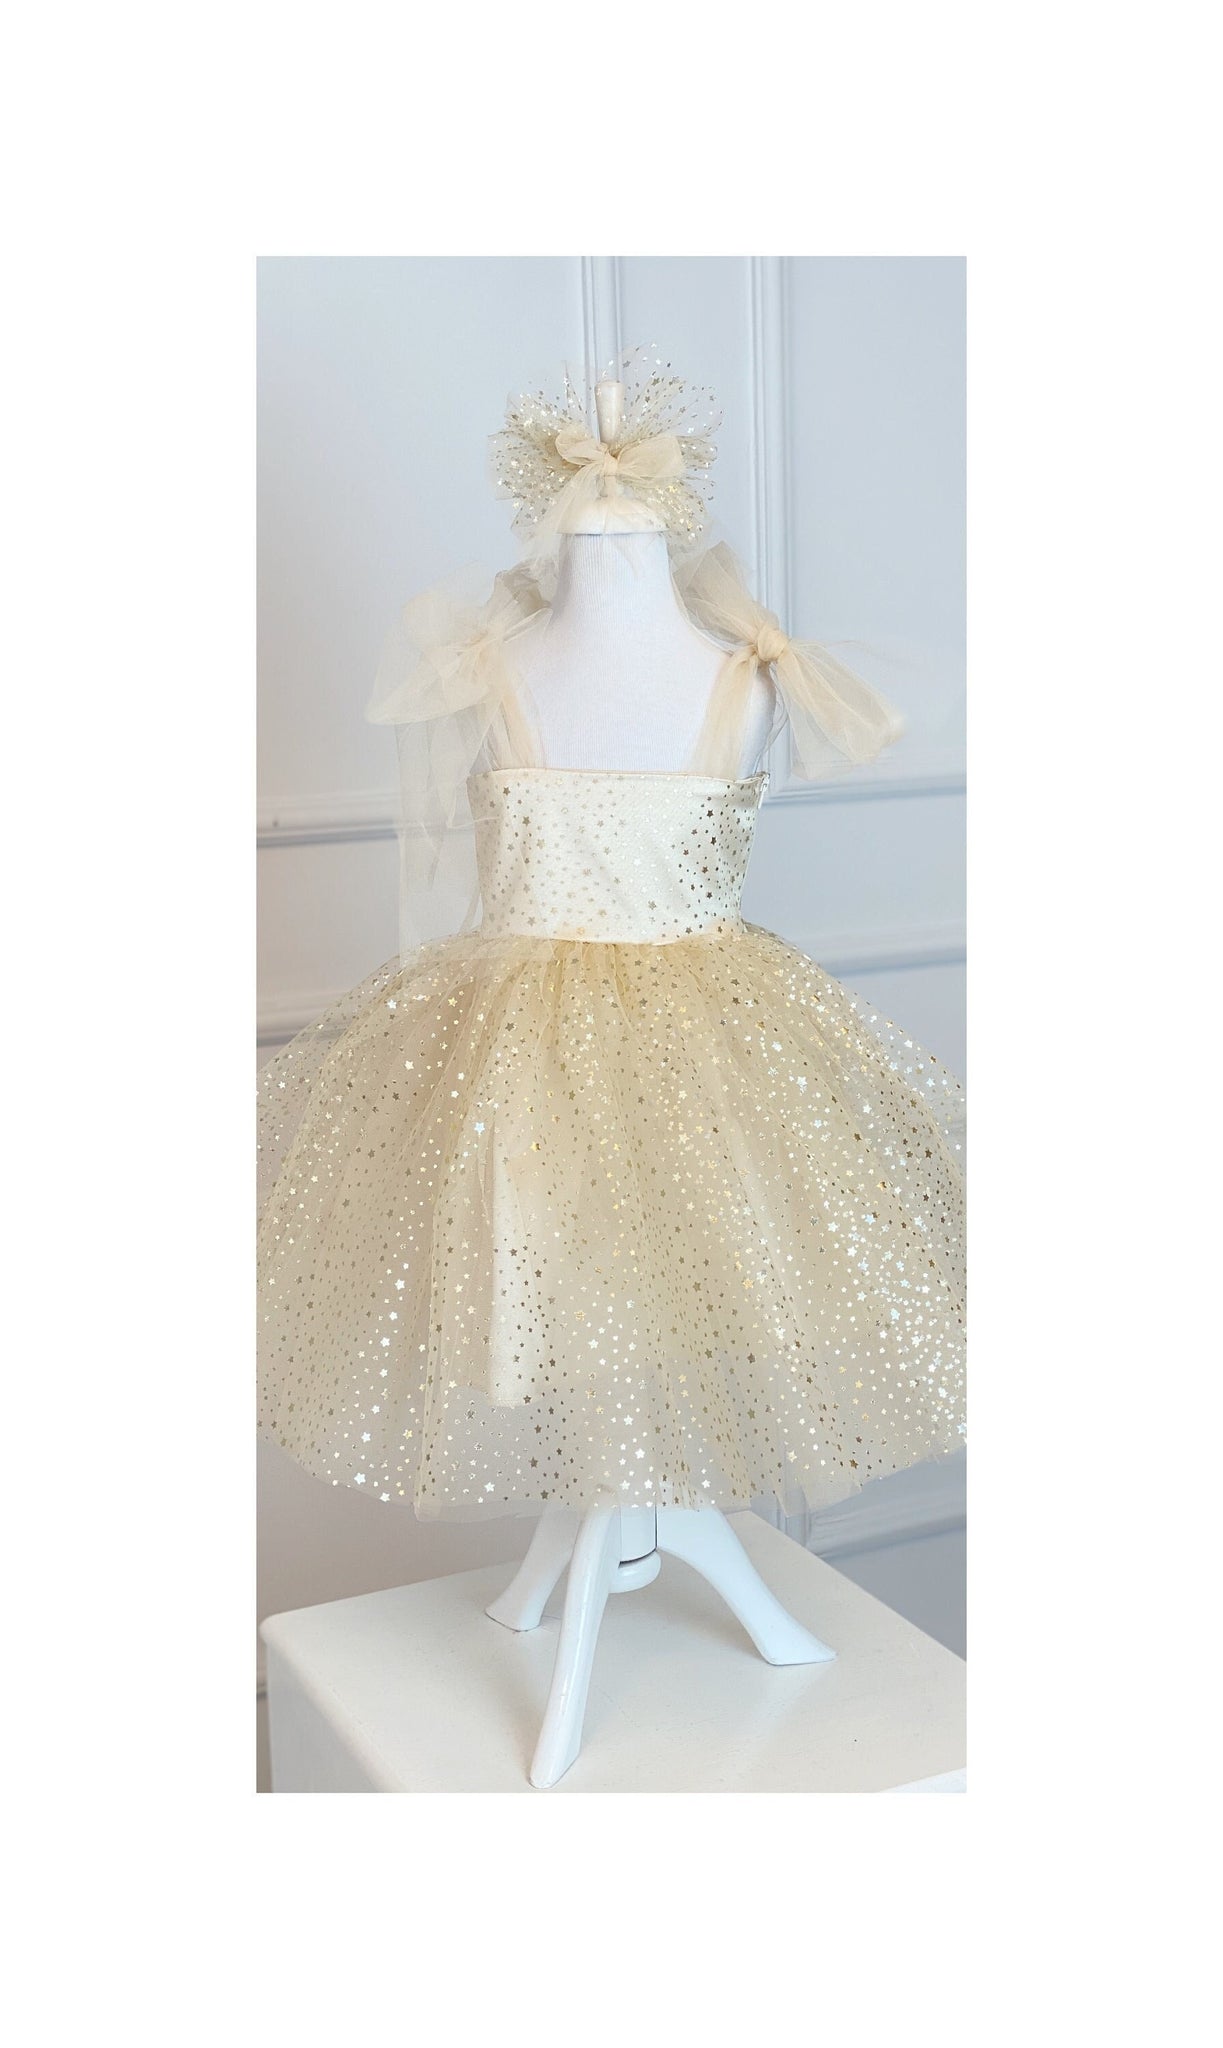 Girl Bridesmaid Dress, Baptism Dress, Champagne Flower Dress, Wedding Dress, Toddler Outfit, Infant 1st Gown, Pageant Dress,